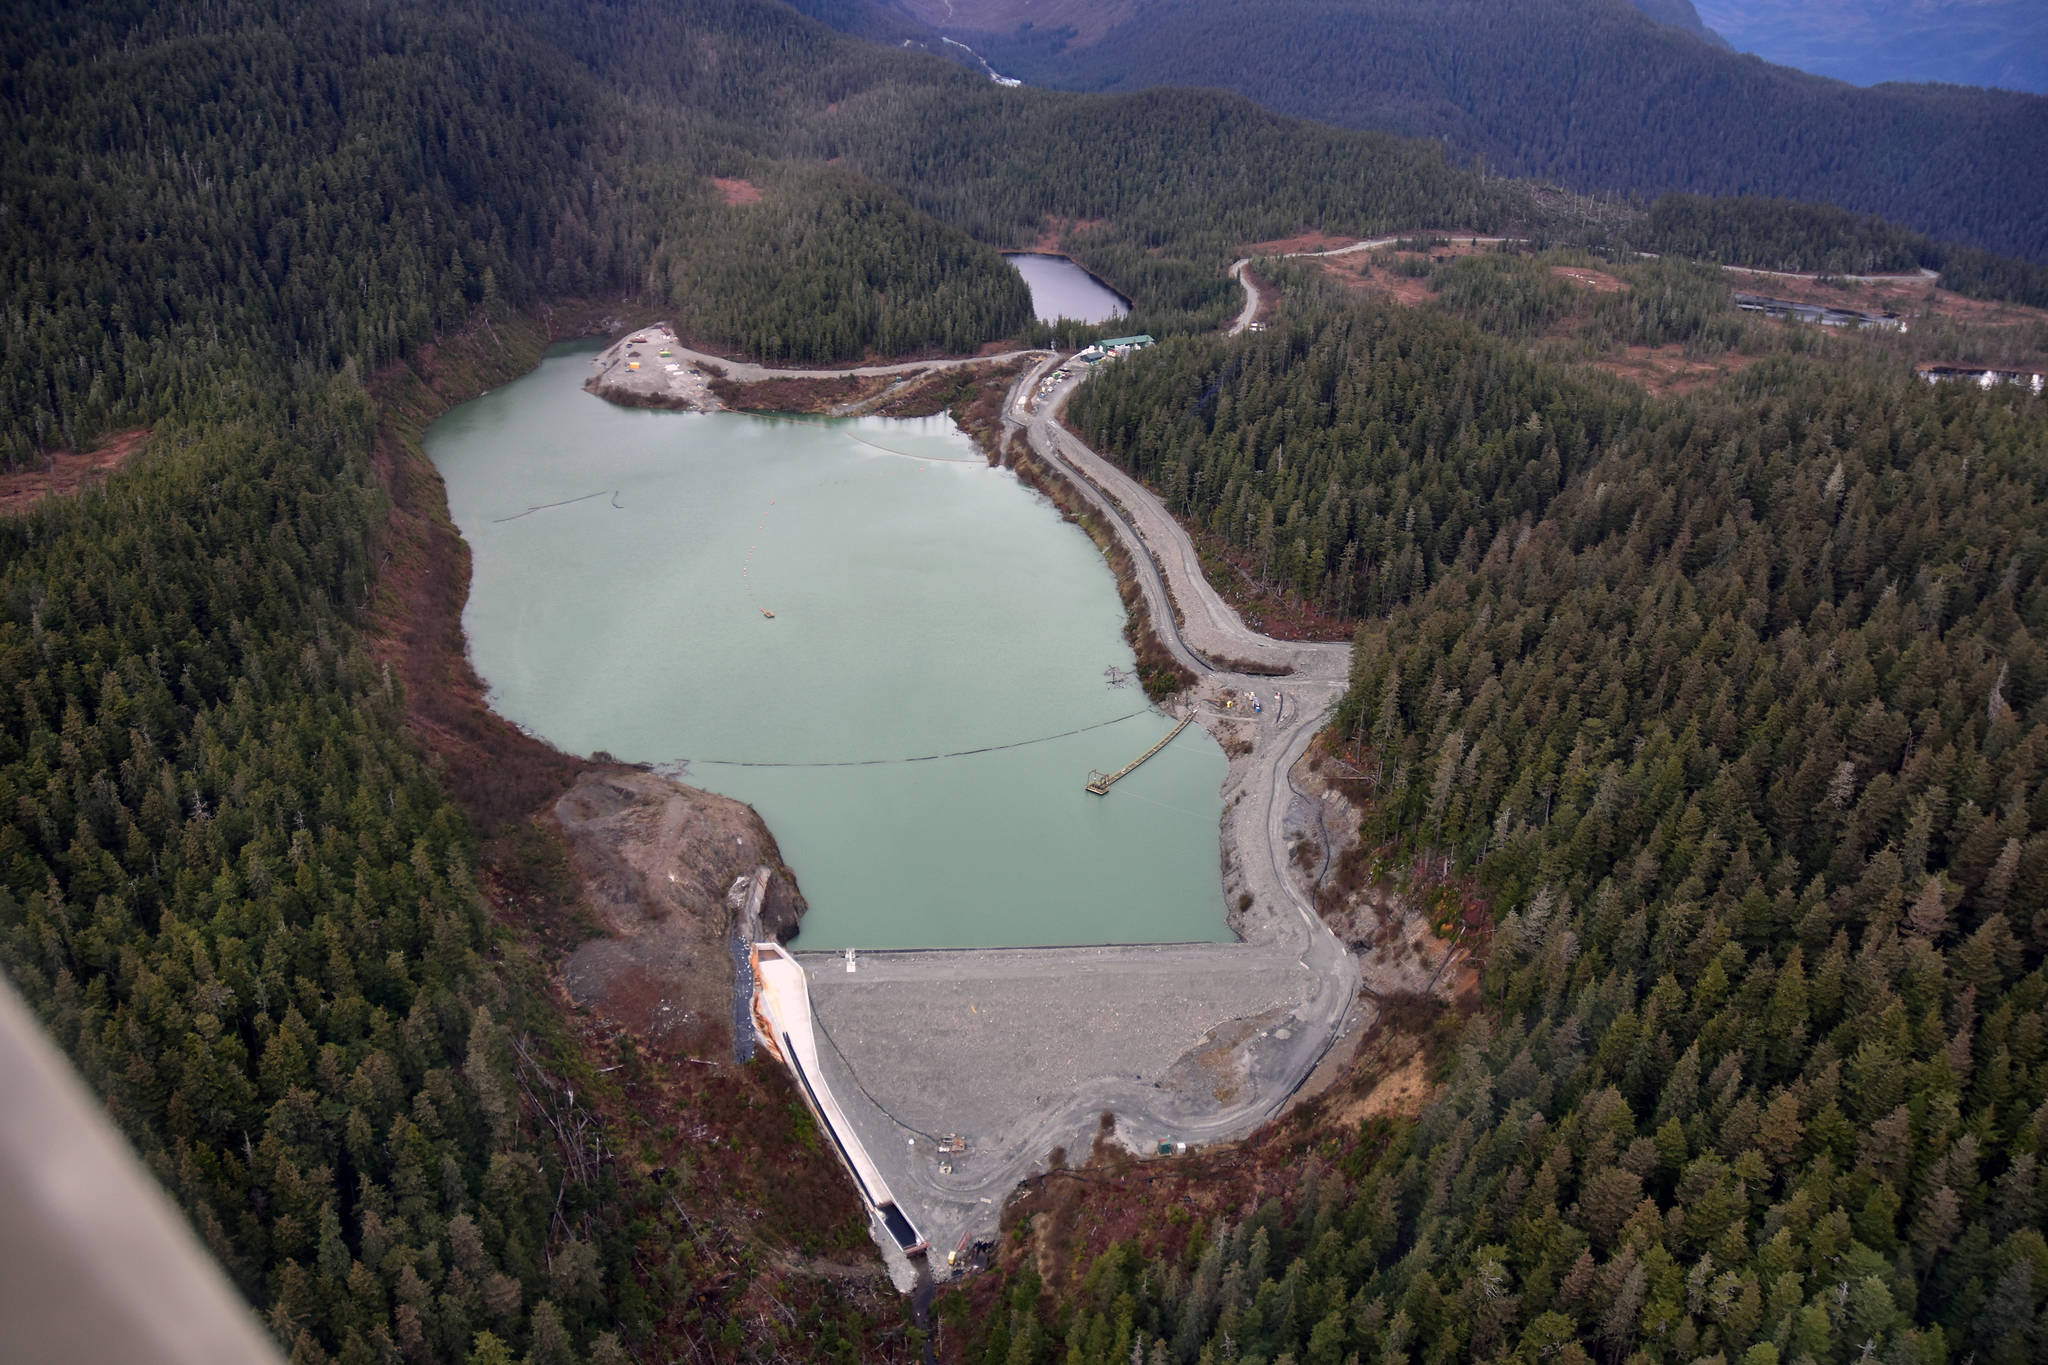 Coeur Alaska will likely be able to expand their facilities at the Kensington Gold Mine including the Tailing Treatment Facility, seen here in this October 2019 photo, after the U.S. Forest Service announced it intends to approve the company’s proposal to extend the mine’s life by 10 years. Operations were expected to end in 2023 under a plan approved in 2005. (Peter Segall / Juneau Empire File)